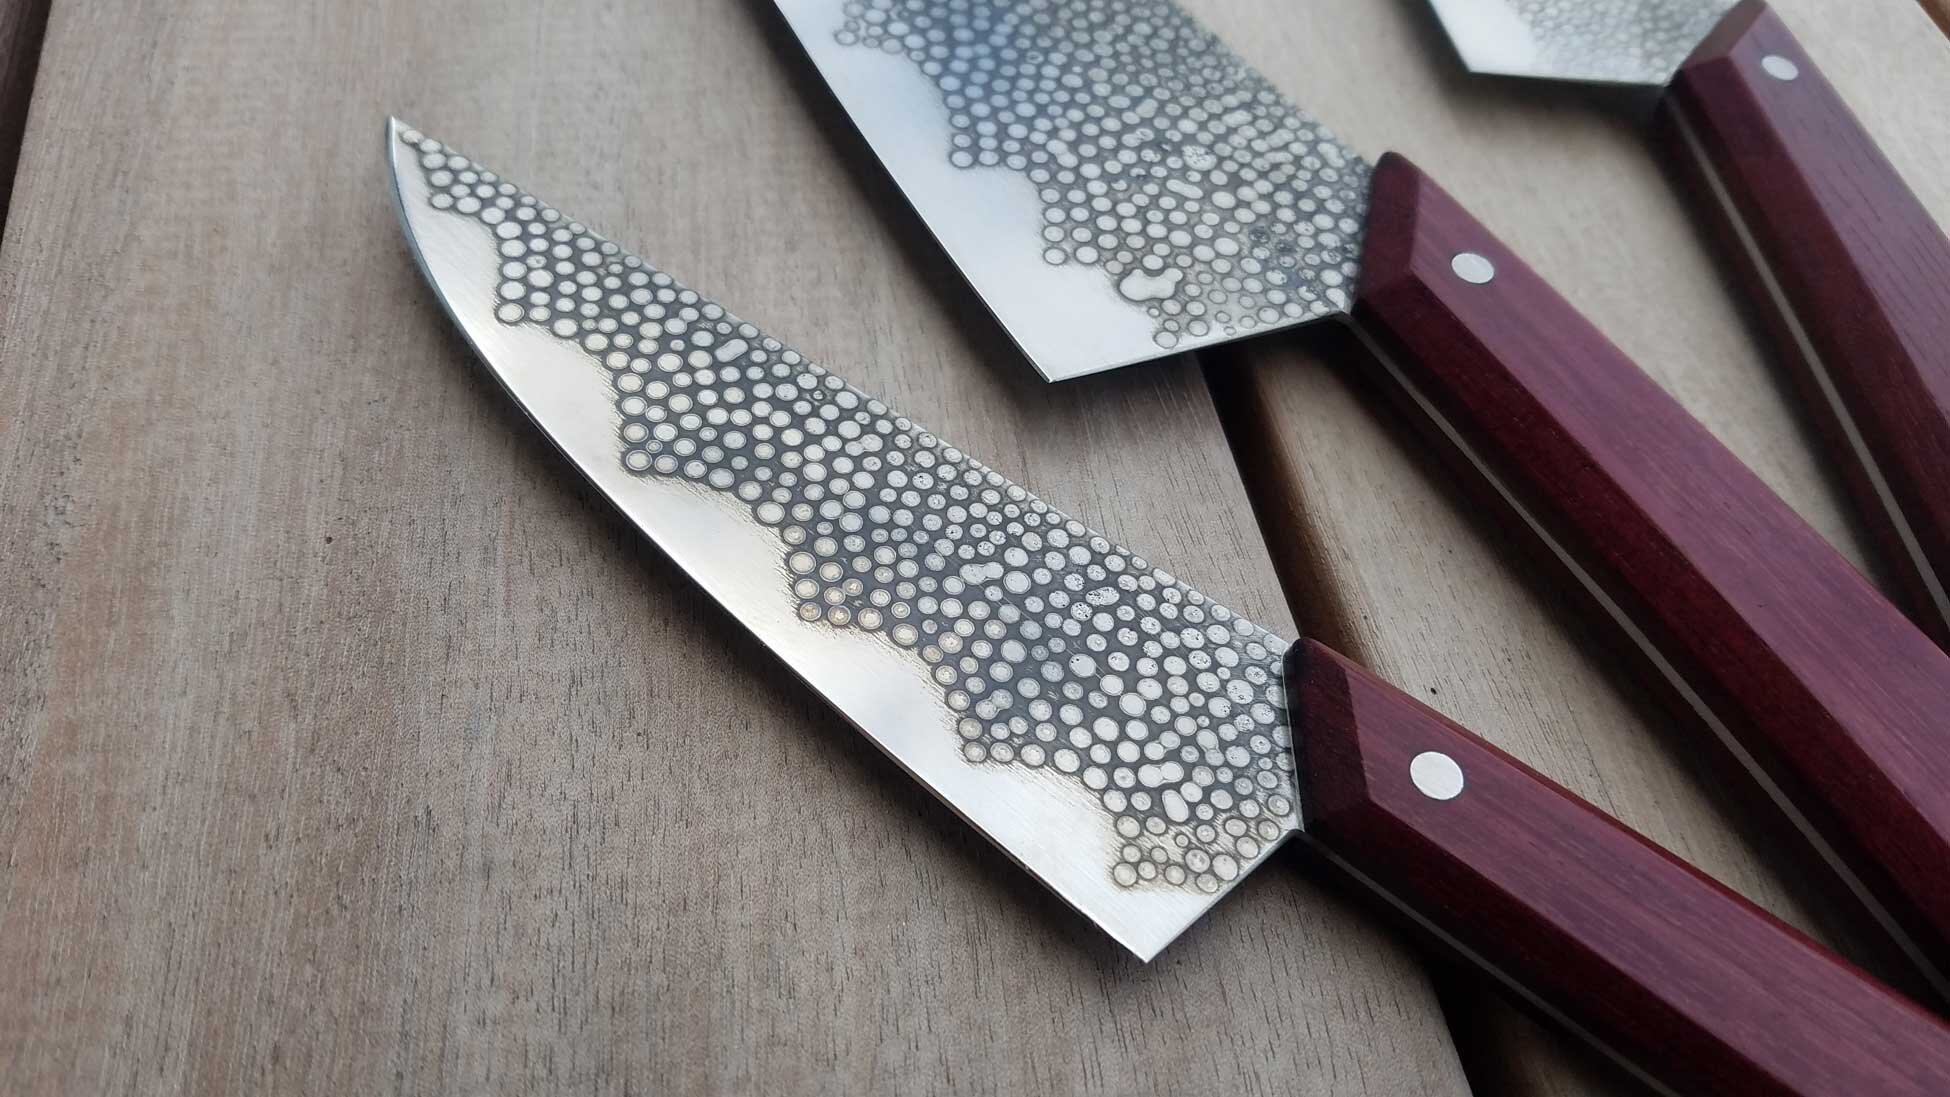  The blade finish is called forced “pattern” patina, which helps preserve the knives. 